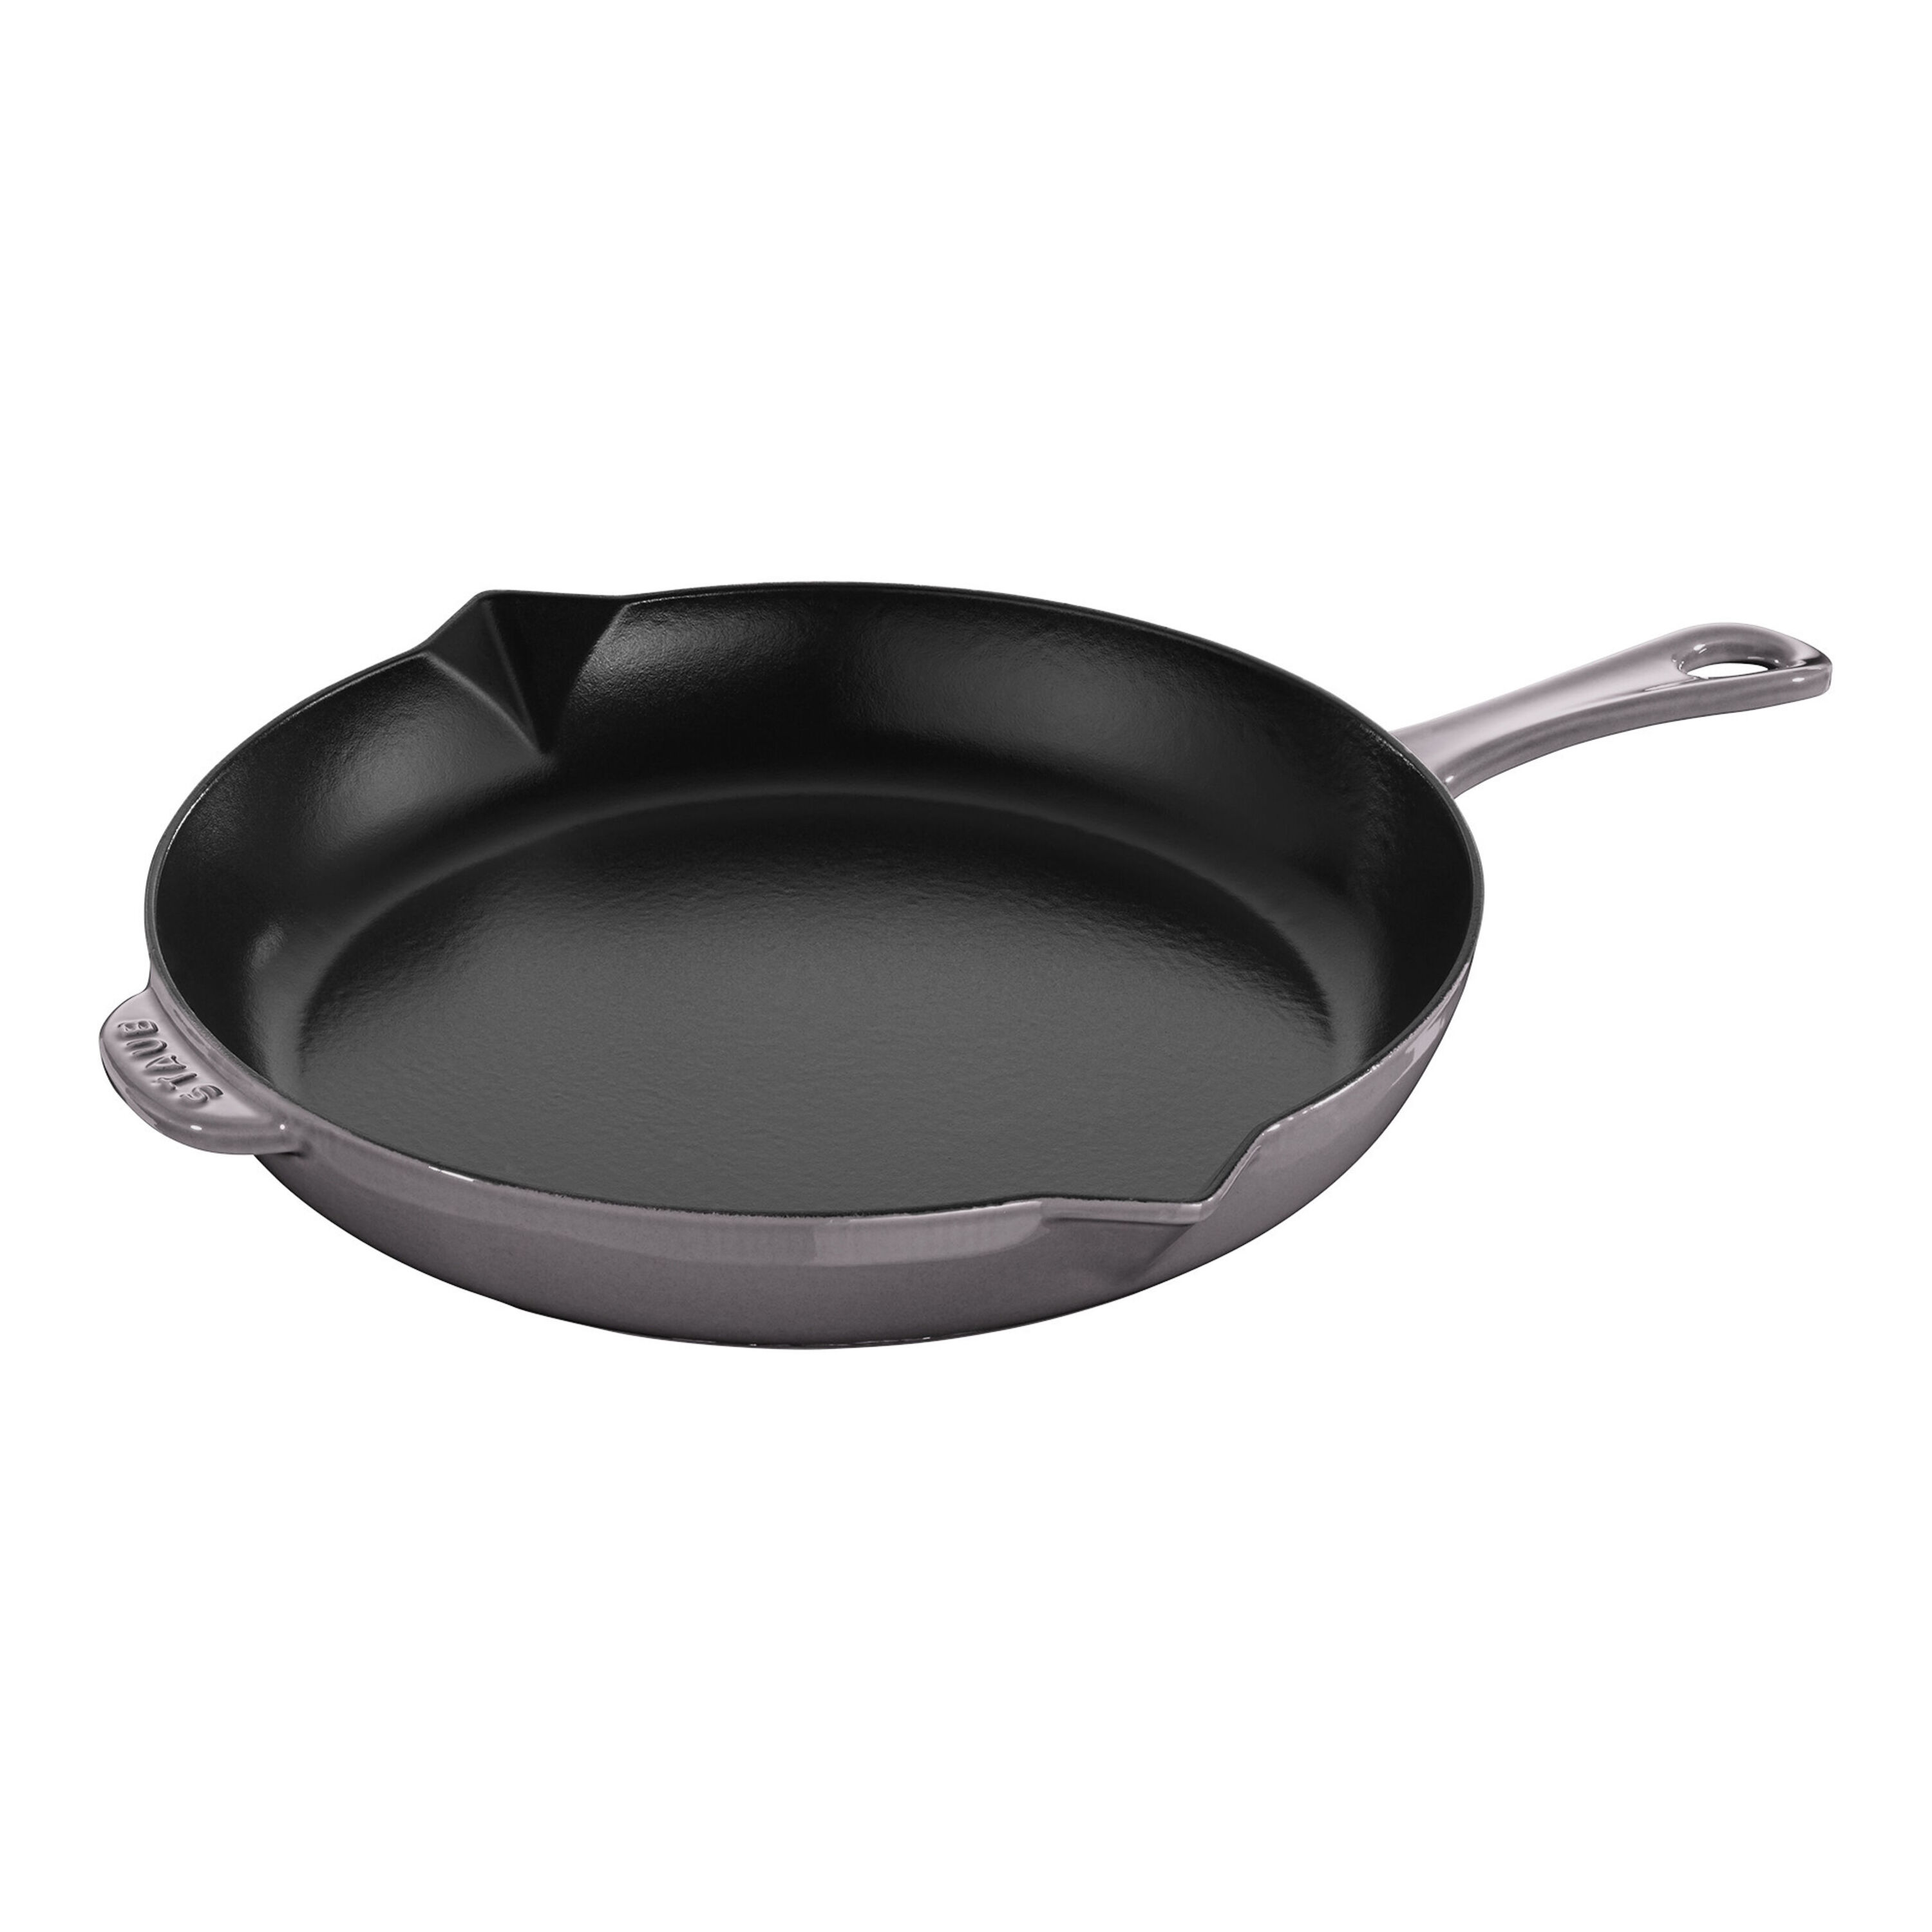 Country Charm cast iron electric skillet - powered on - Northern